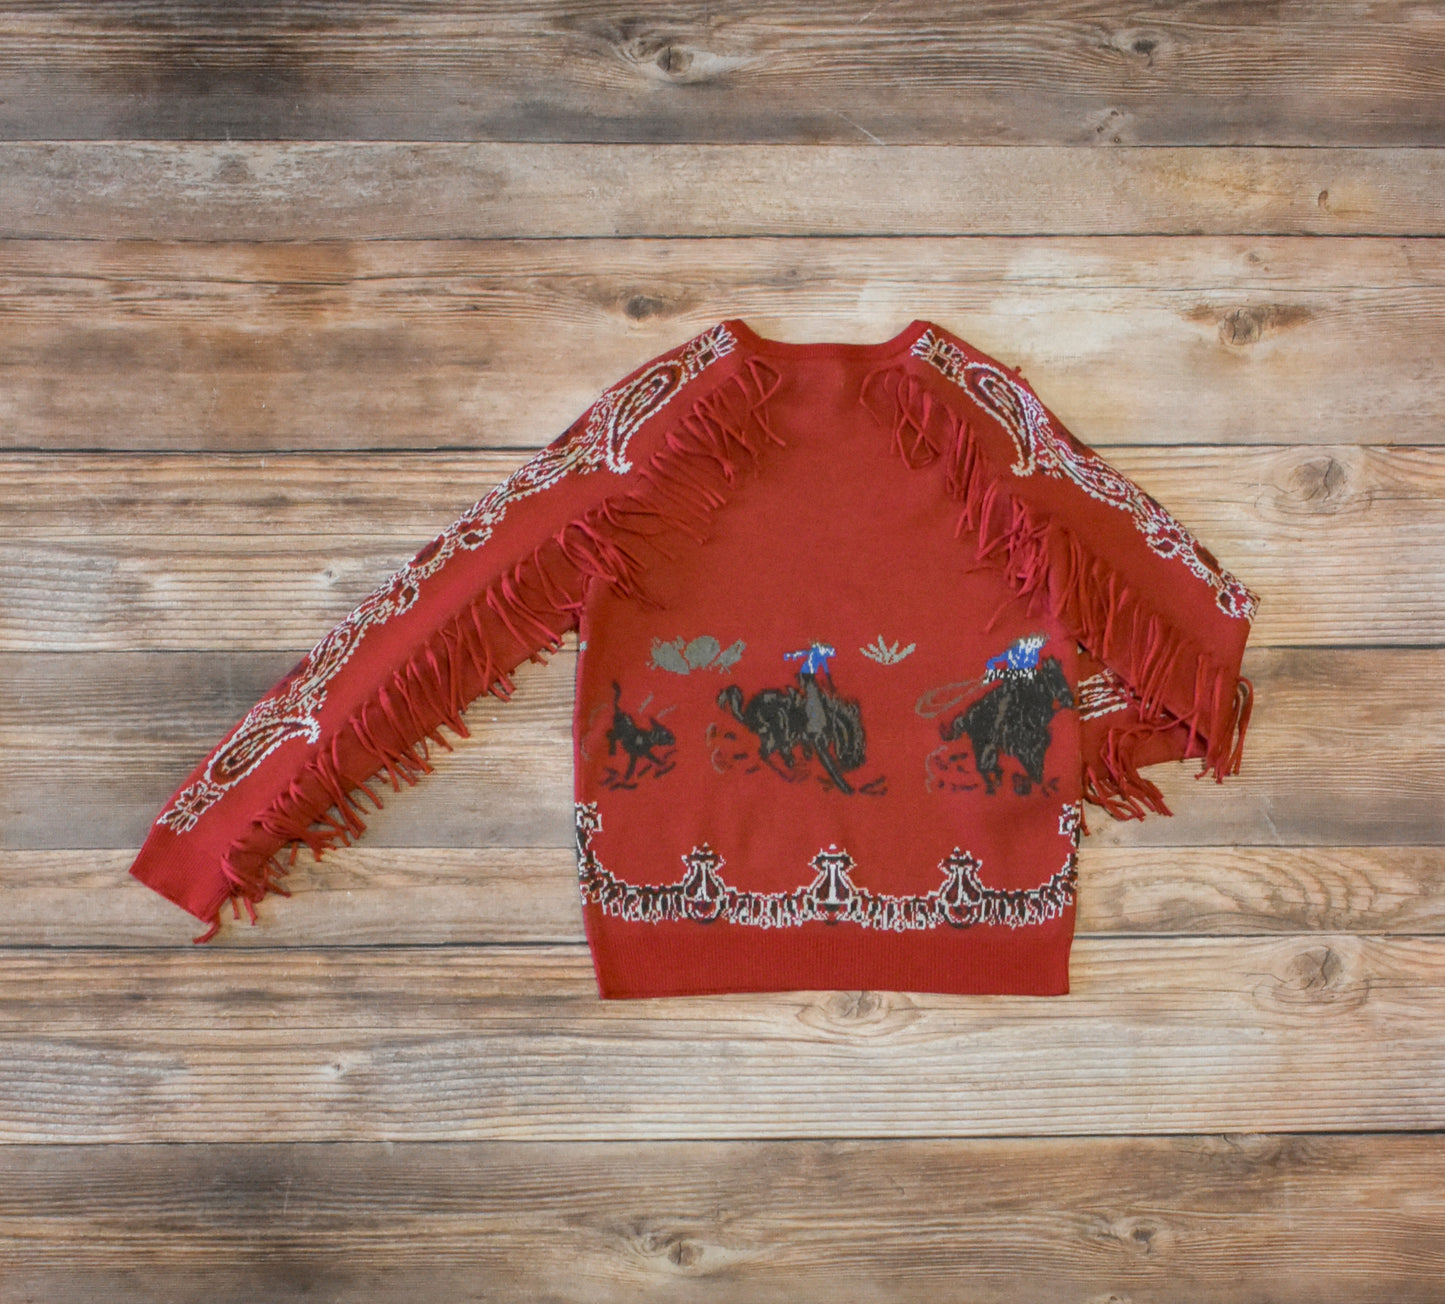 Tasha Polizzi Howdy Red Pullover Sweater at 6Whiskey six whisky womens fringe and horse knit sweater